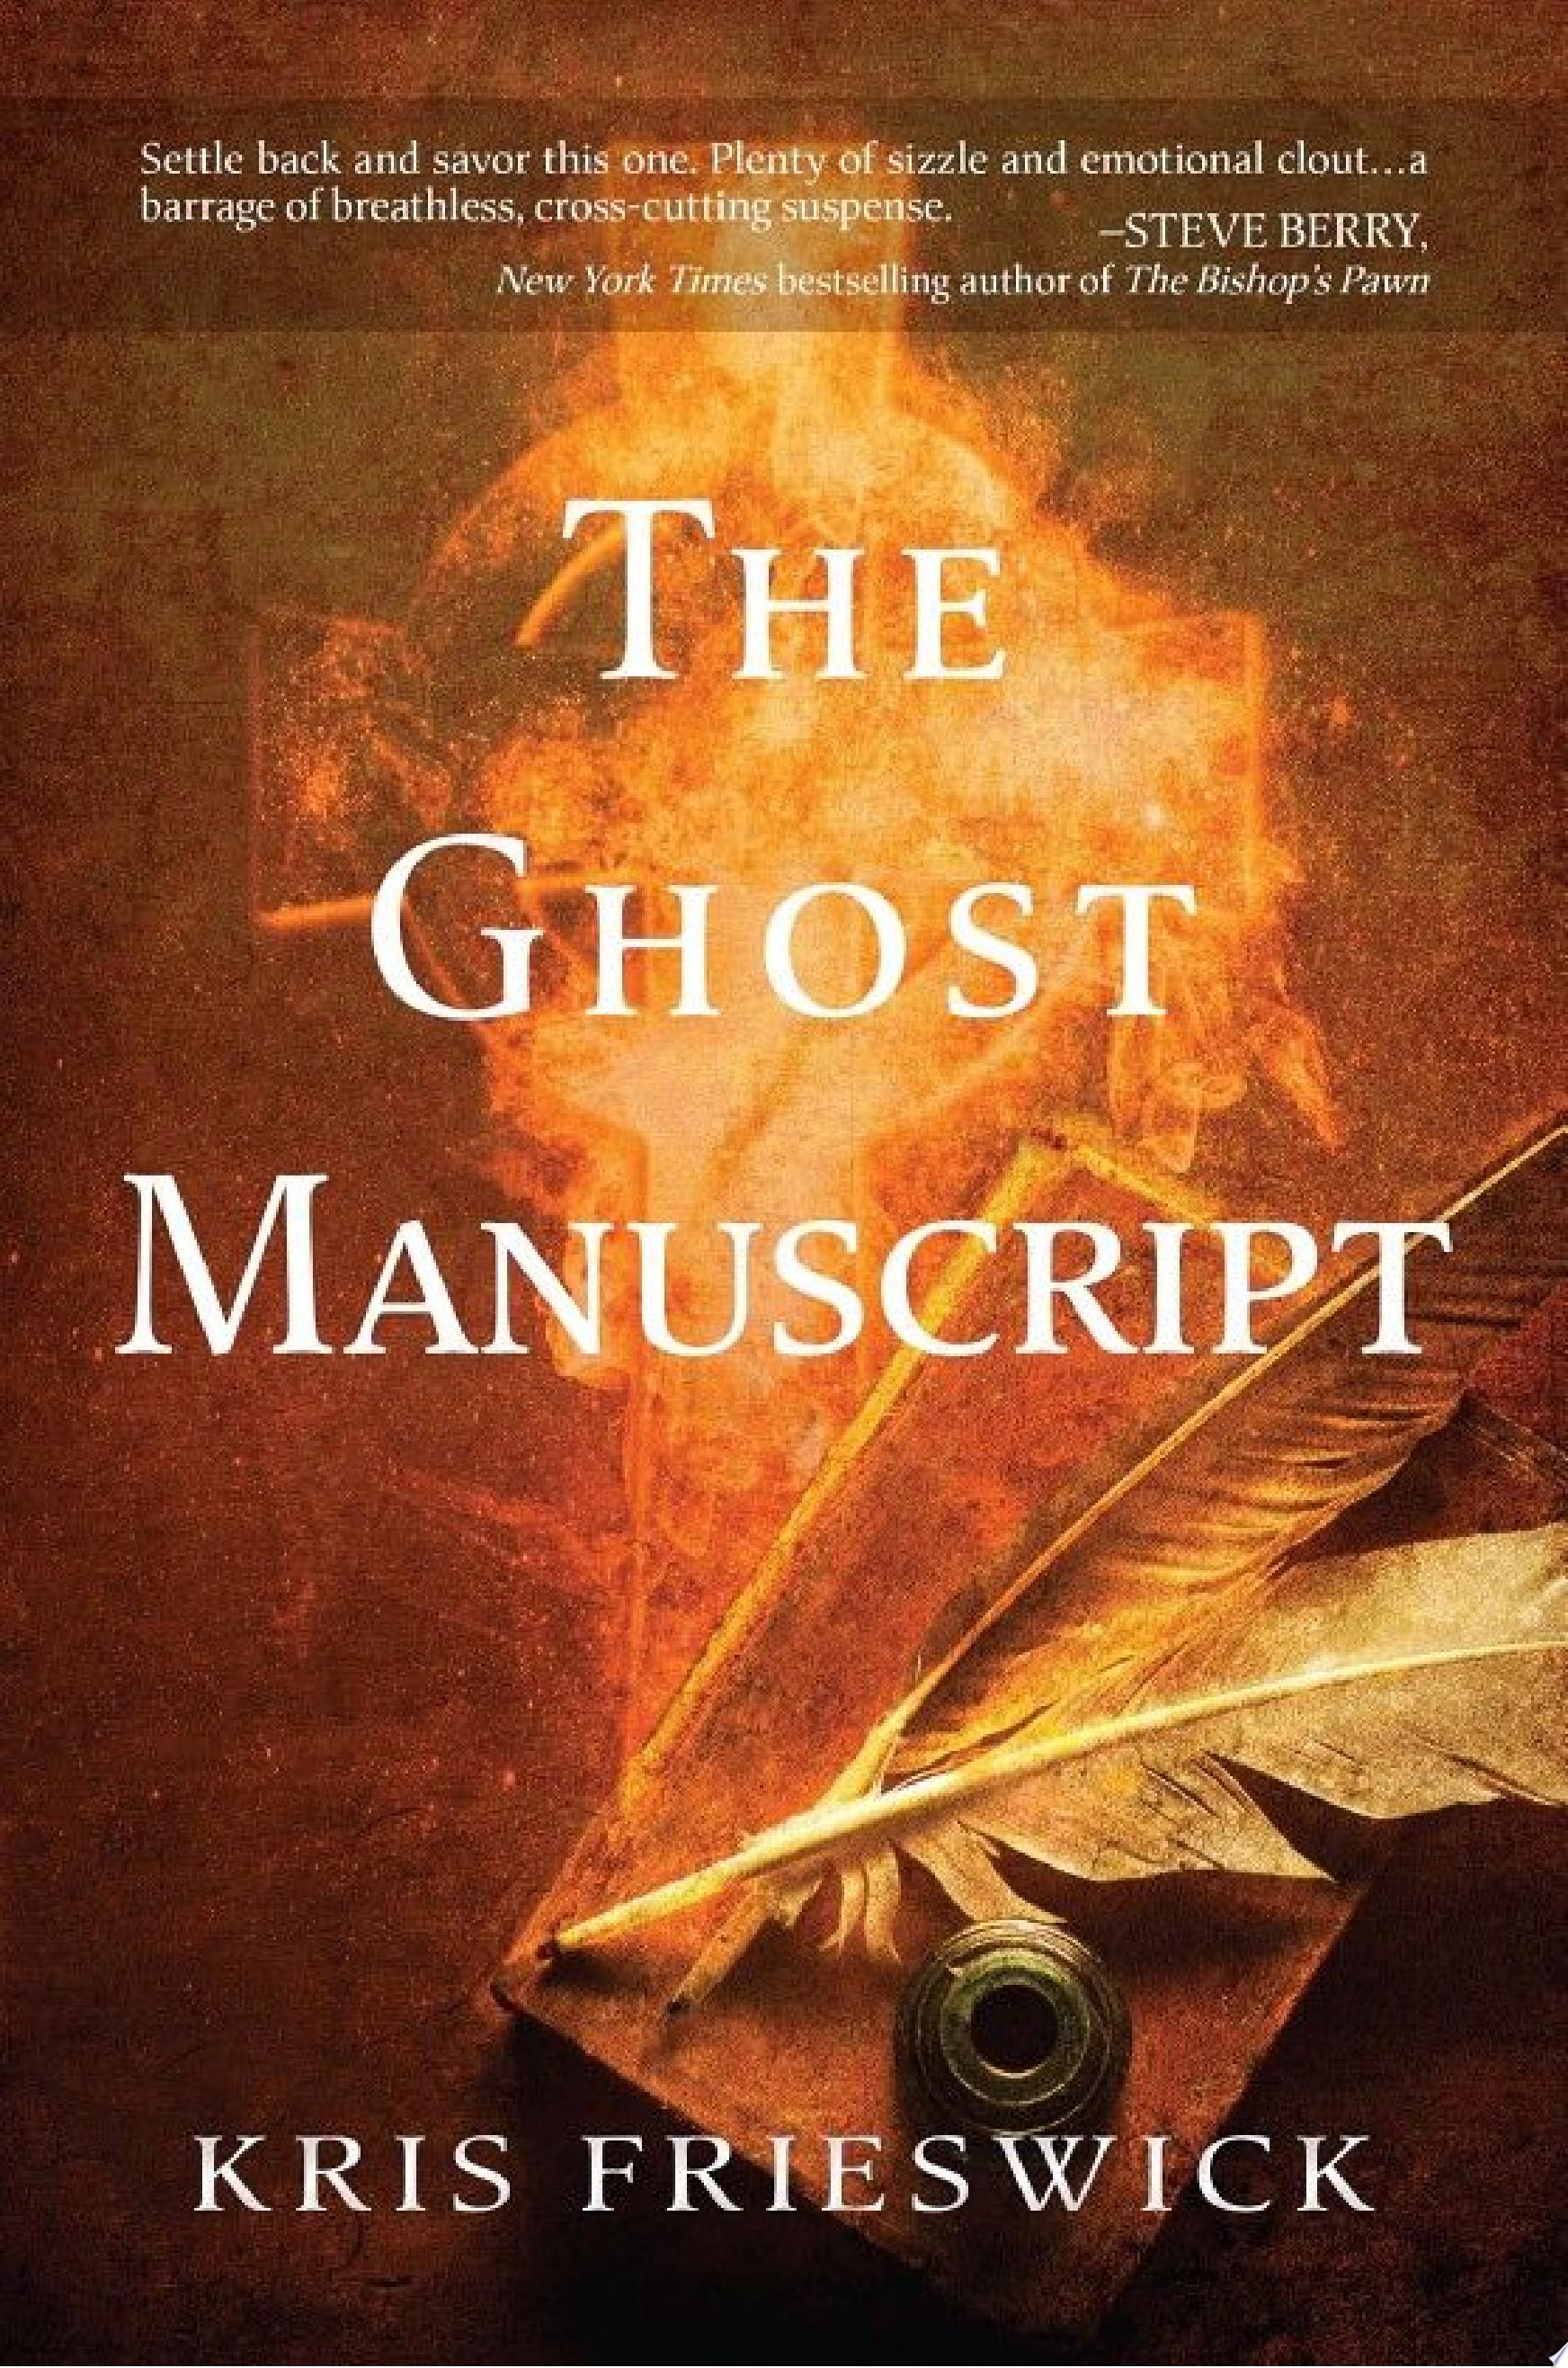 Image for "The Ghost Manuscript"